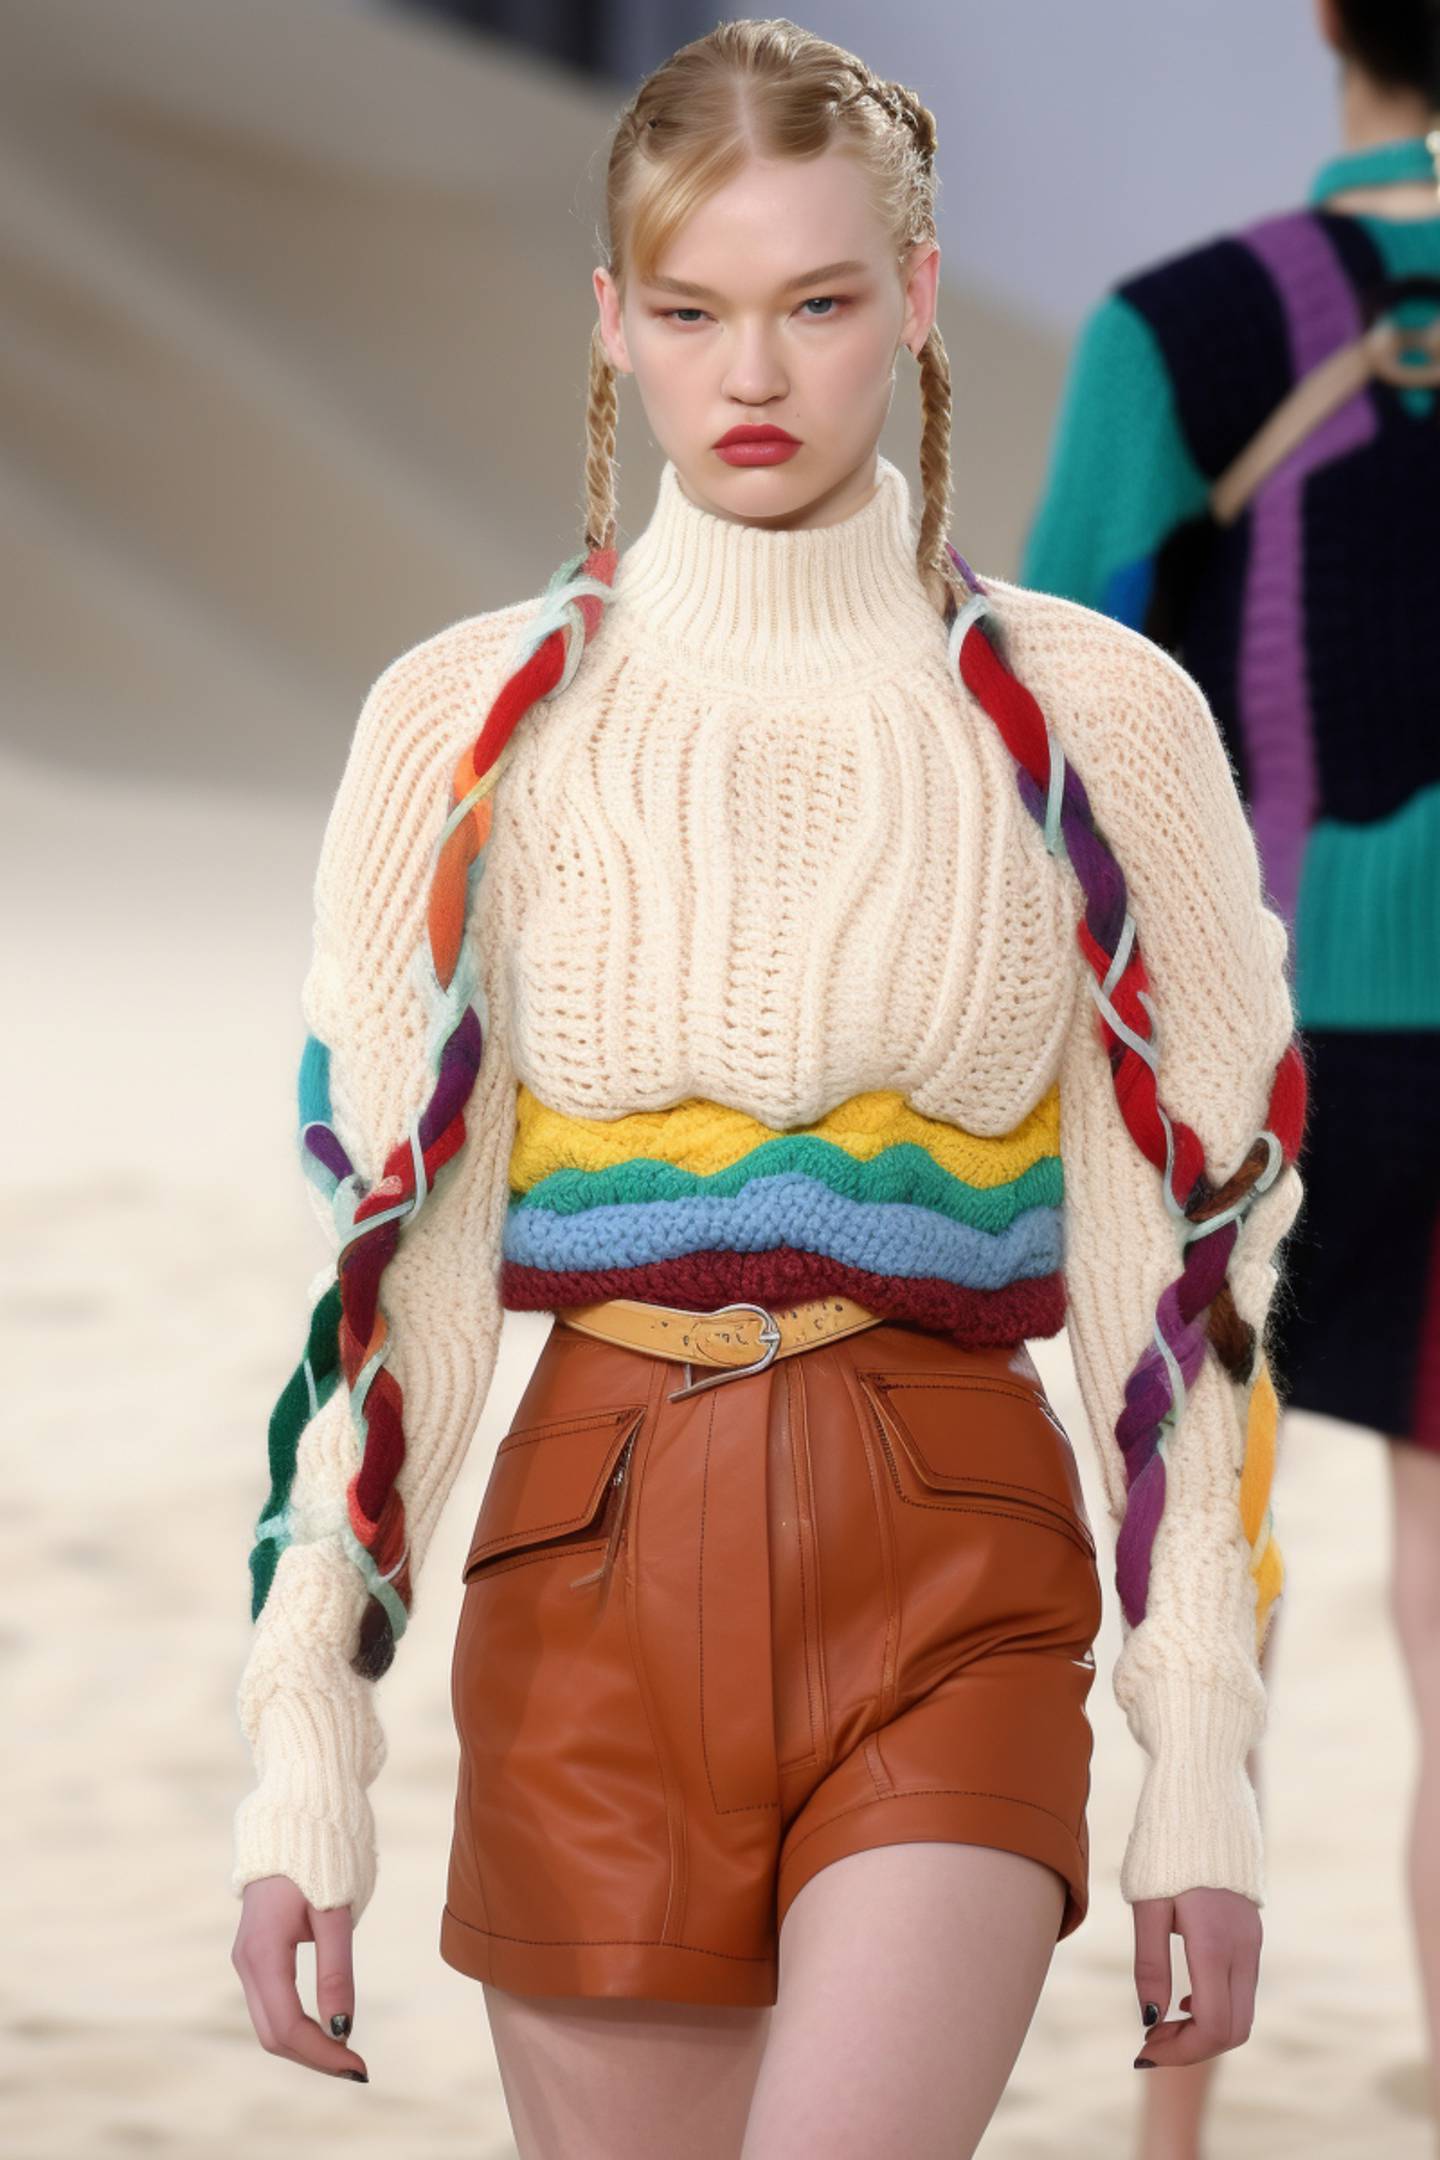 A photorealistic model wearing a knit sweater and leather shorts walks against a desert backdrop.